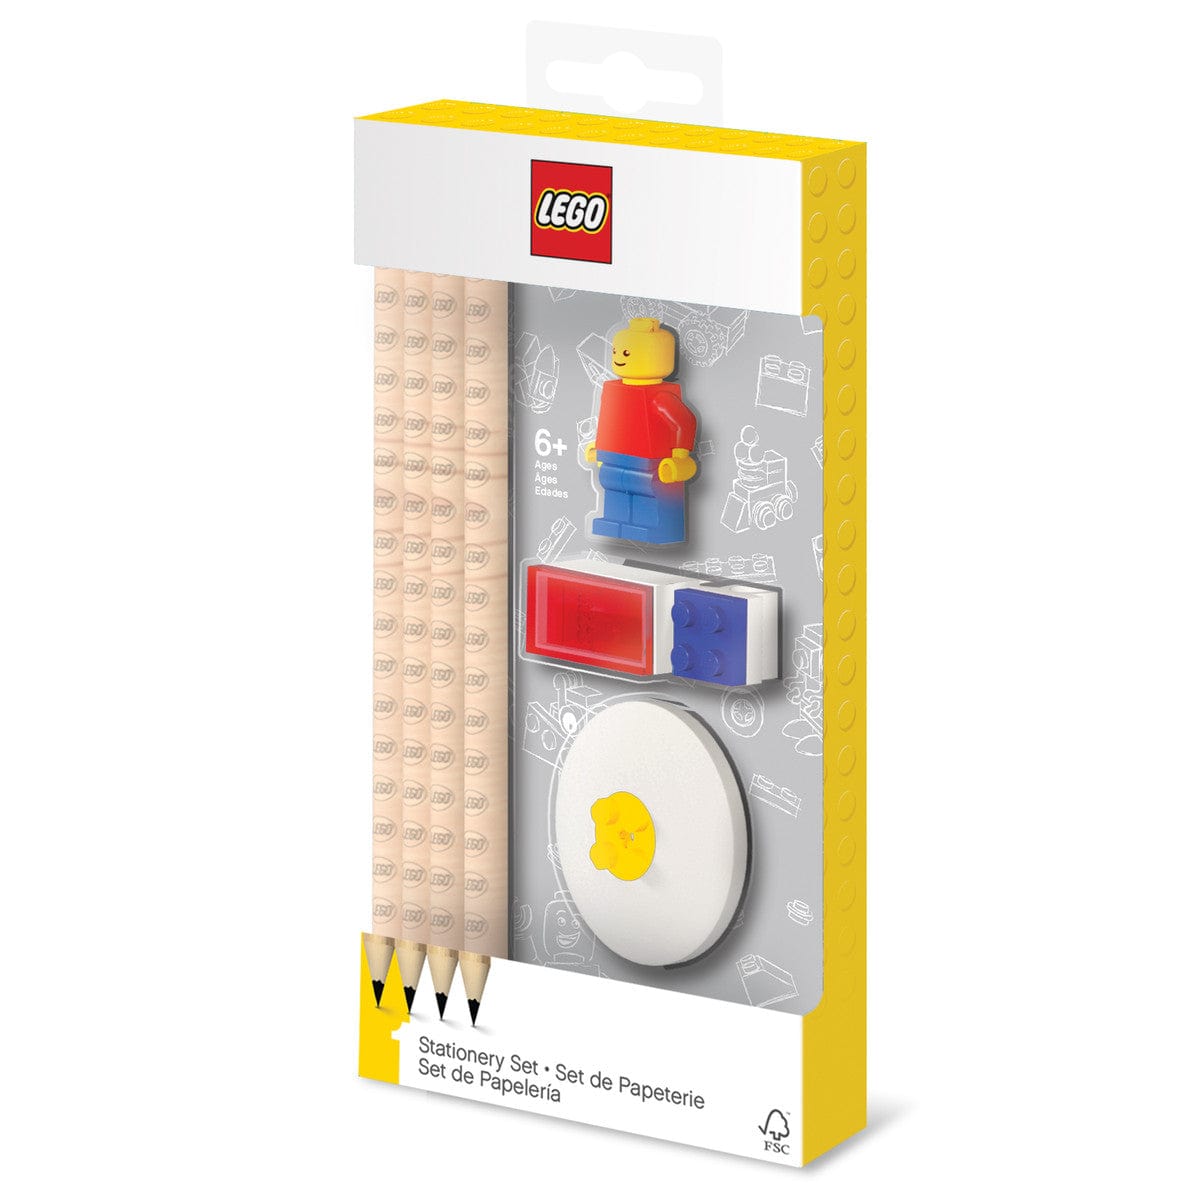 Best Lego Sets on Sale - The Freebie Guy: Freebies, Penny Shopping, Deals,  & Giveaways